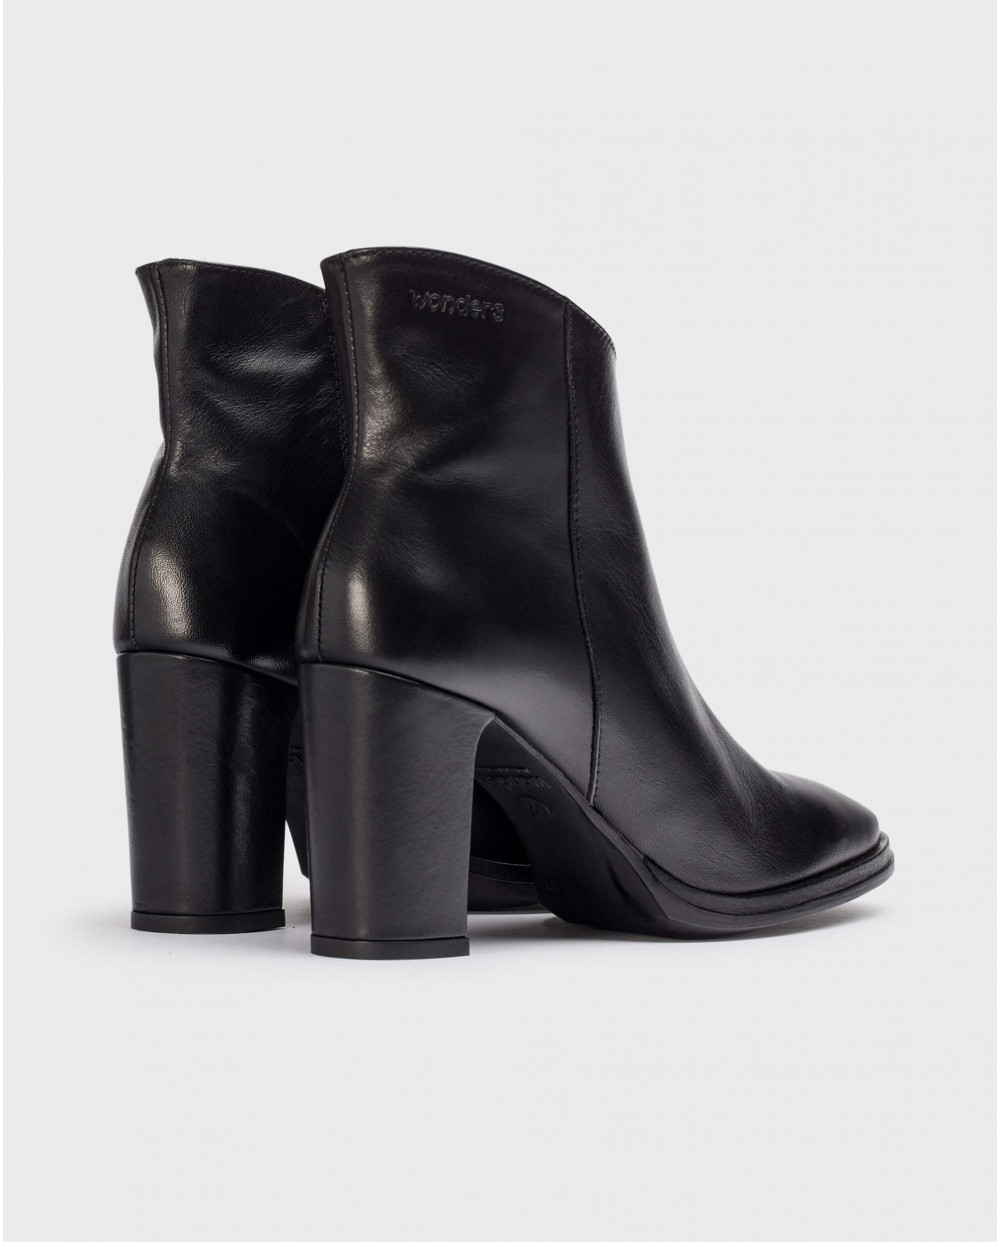 Wonders-Ankle Boots-Black OST ankle boot